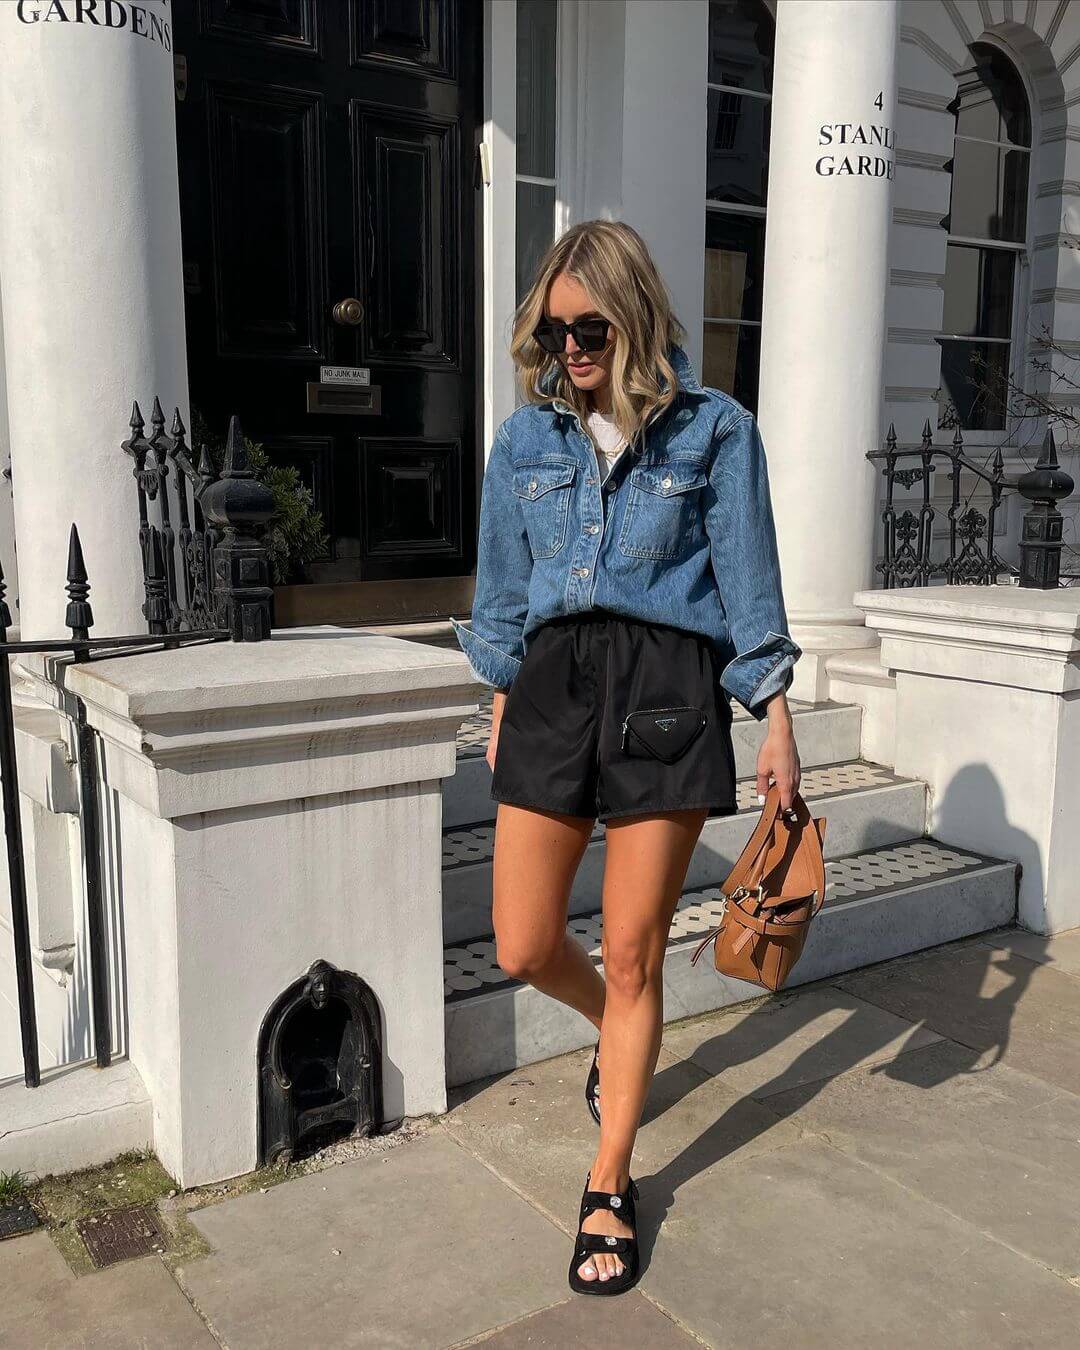 We're Loving This Updated Take On Styling A Denim Shirt